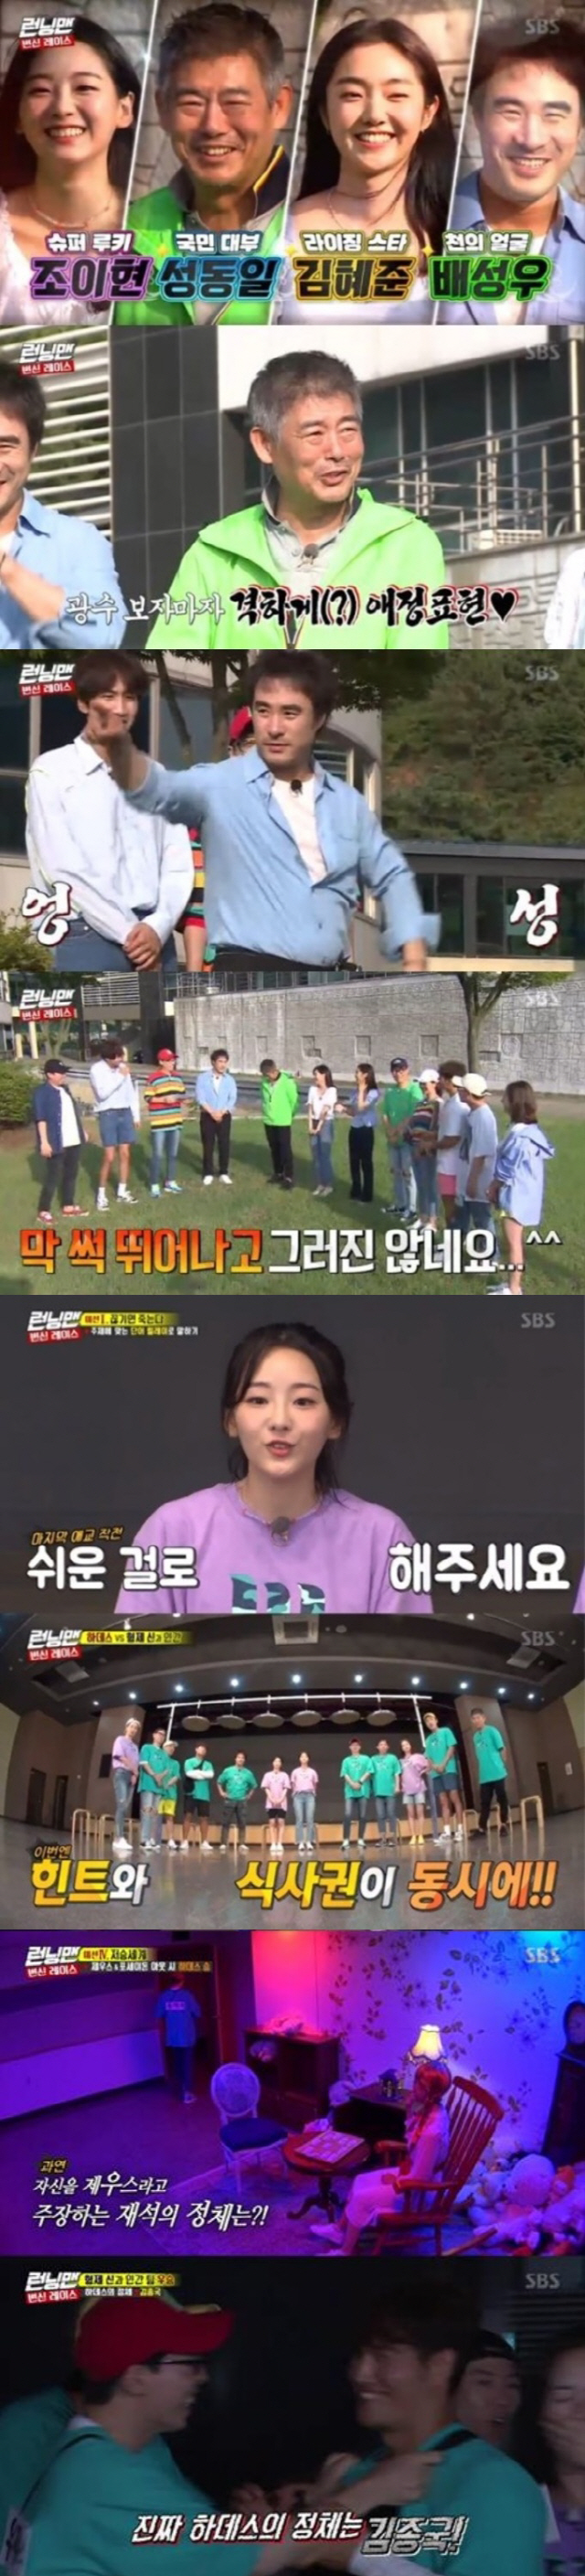 SBS Running Man took the top spot in the same time zone of 2049 target audience rating with a big gap.The show was accompanied by actor Sung Dong-il, Bae Seong-woo, Jo Yi-hyun and Kim Hye-joon of the movie Transform.The members challenged various missions to find Hades, Zeus, and Poseidon gods, and the chewy race that led to doubting each other until the end was exciting.Along with this, the performance of the guests also shone.Sung Dong-il, like Lee Kwang-soos natural enemy, tightened Lee Kwang-soos breath and made a penalty, while Bae Seong-woo laughed with the charm of introducing a clumsy ballet.The final mission was decorated with the horror special The Underworld Race.In order for the brothers and men to win the championship, they have to make Hades in-N-Out Burger, and if Hades makes Zeus and Poseidon in In-N-Out Burger, Hades will win alone.The members gathered hints at the appearance of ghosts in the race, and Yoo Jae-Suk and Kim Jong-kook were selected as candidates for Hades.In the meantime, Yoo Jae-Suk put Kim Jong-kooks name tag on the Hades chair that Lee Kwang-soo found, and finally Hades was revealed as Kim Jong-kook.The scene recorded the highest audience rating of 8.4% per minute, accounting for the best one minute.